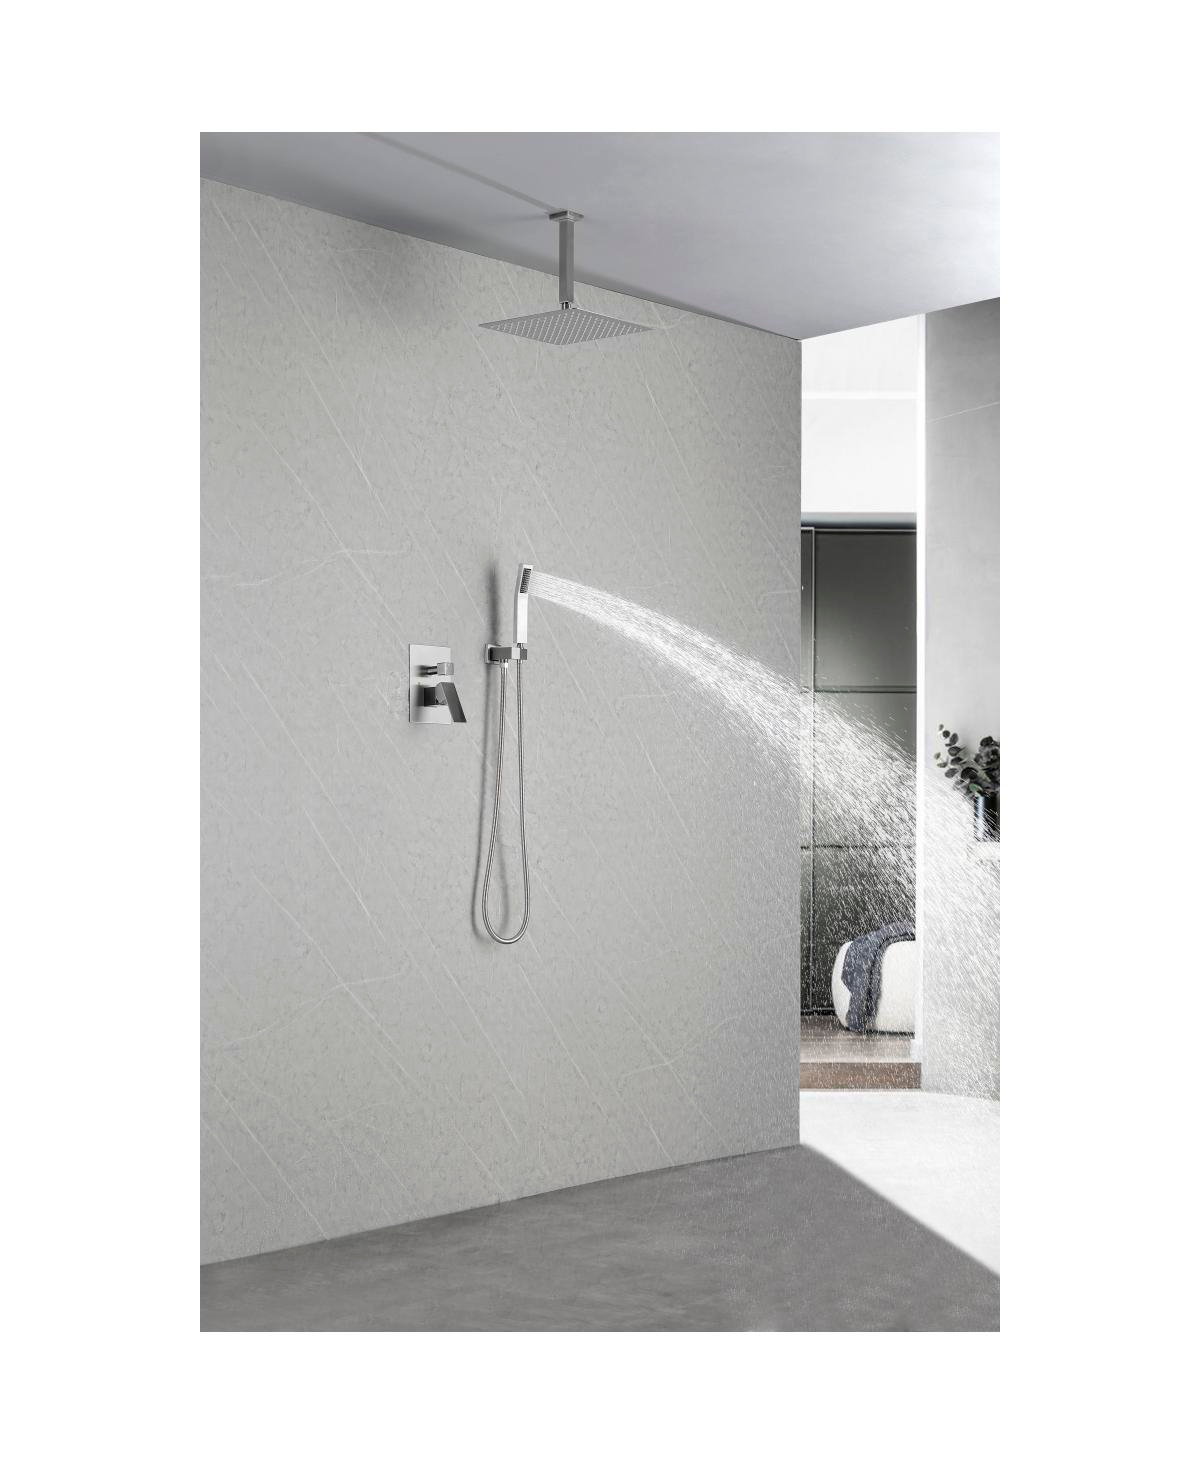 12" Rain Shower Head Systems Wall Mounted Shower 0002 - Silver